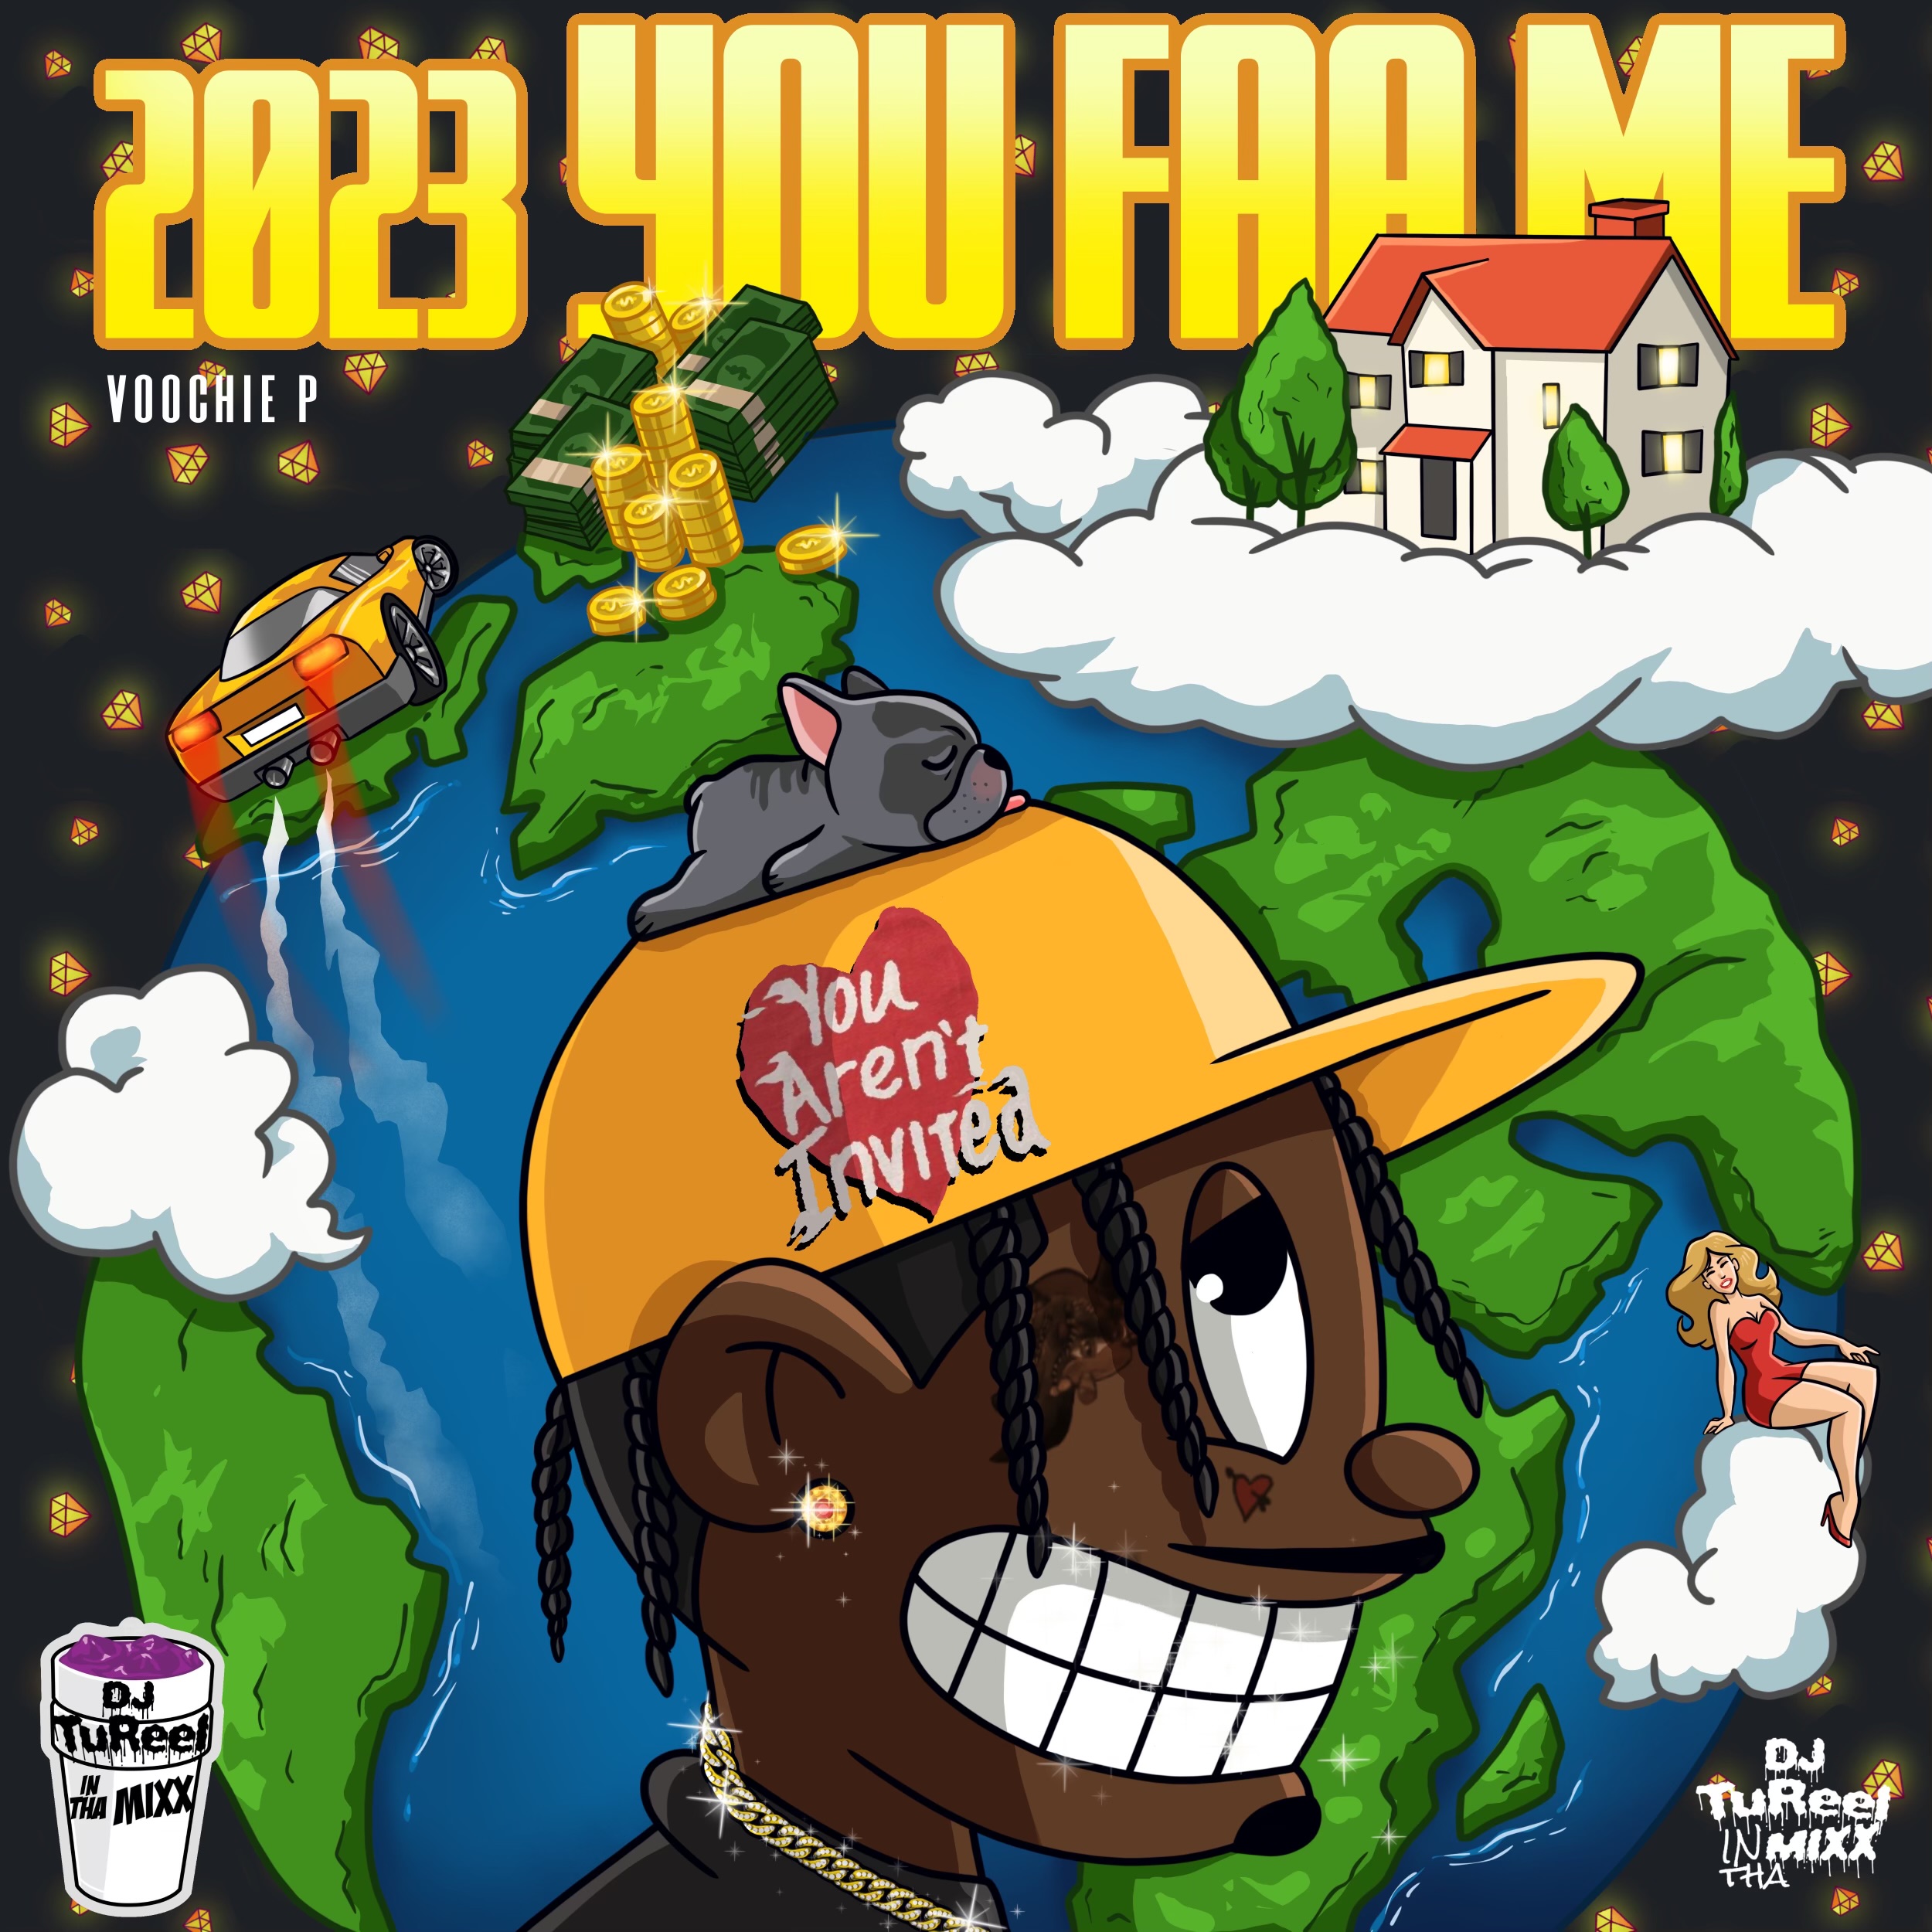 Voochie P - 2023 You Faa Me Cover Art